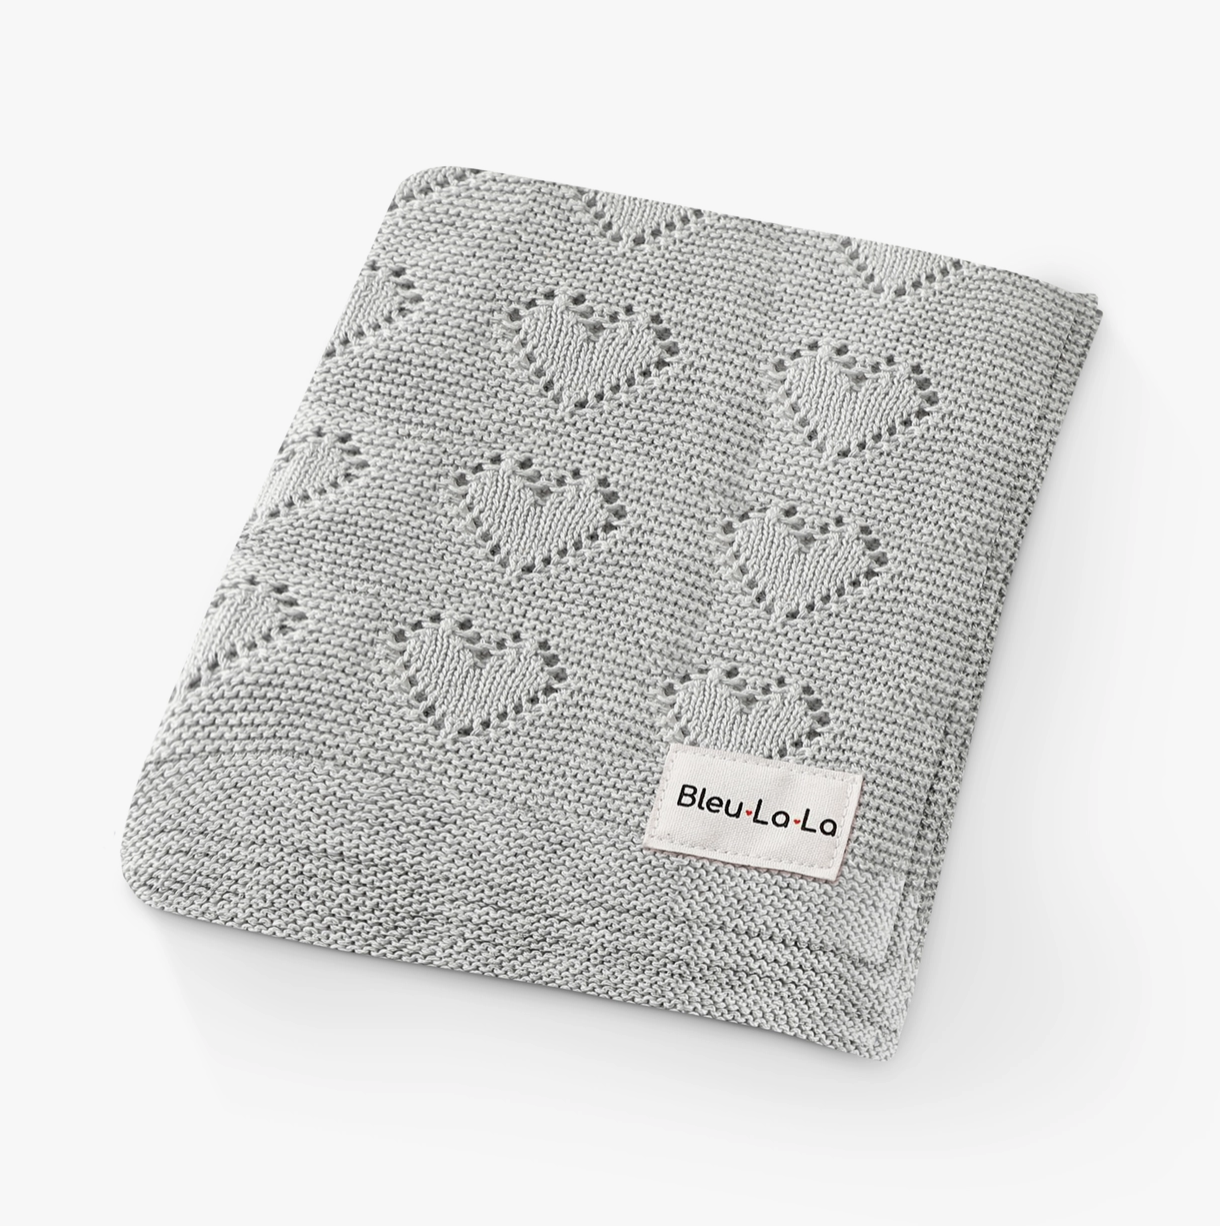 100% Luxury Cotton Swaddle Receiving Baby Blanket - Heart - Gray